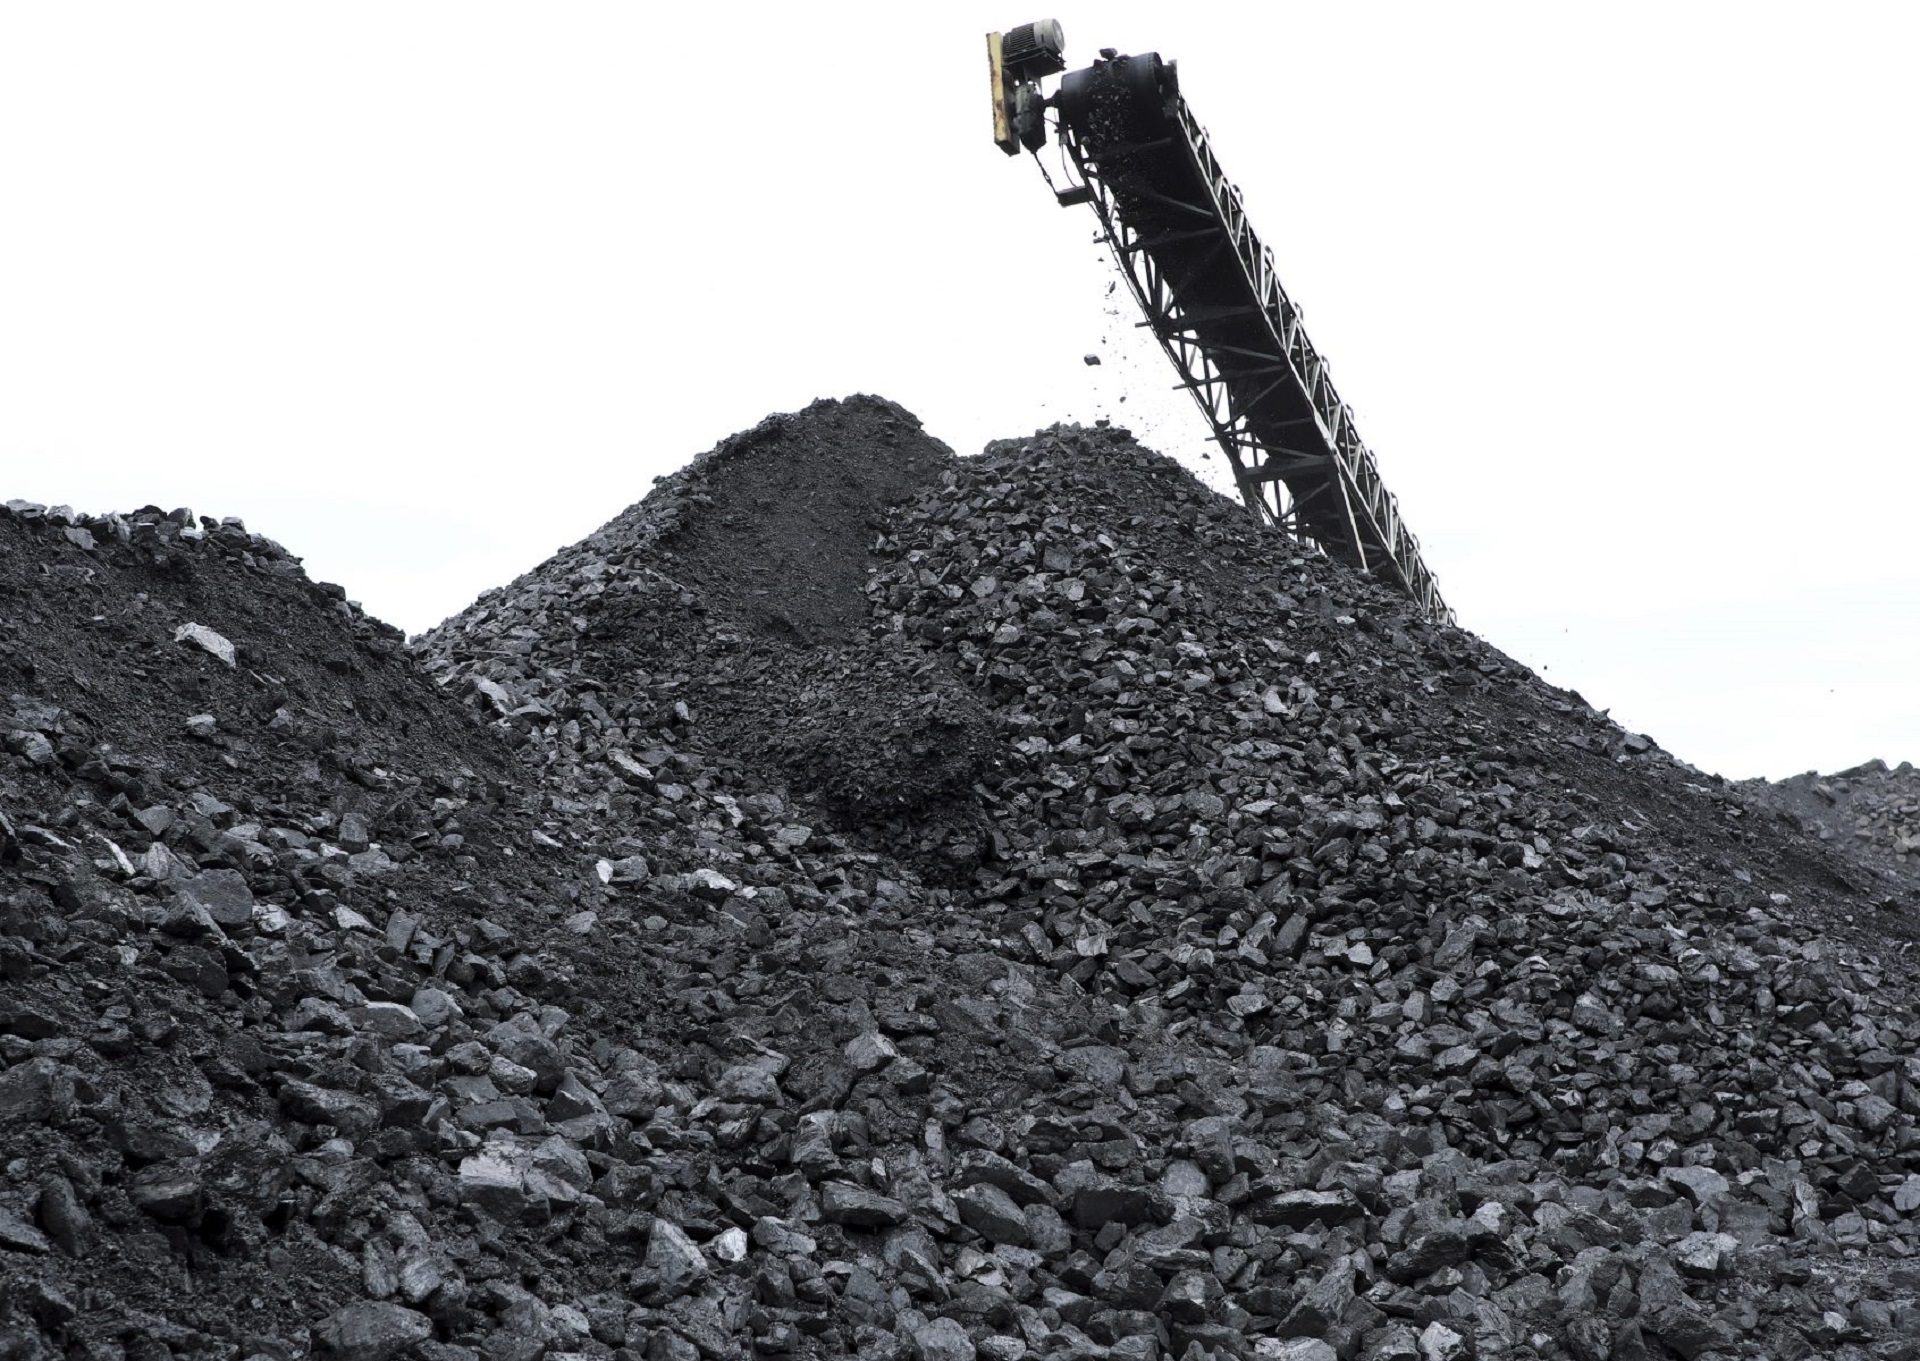 India likely to adopt revenue sharing model for commercial coal mining